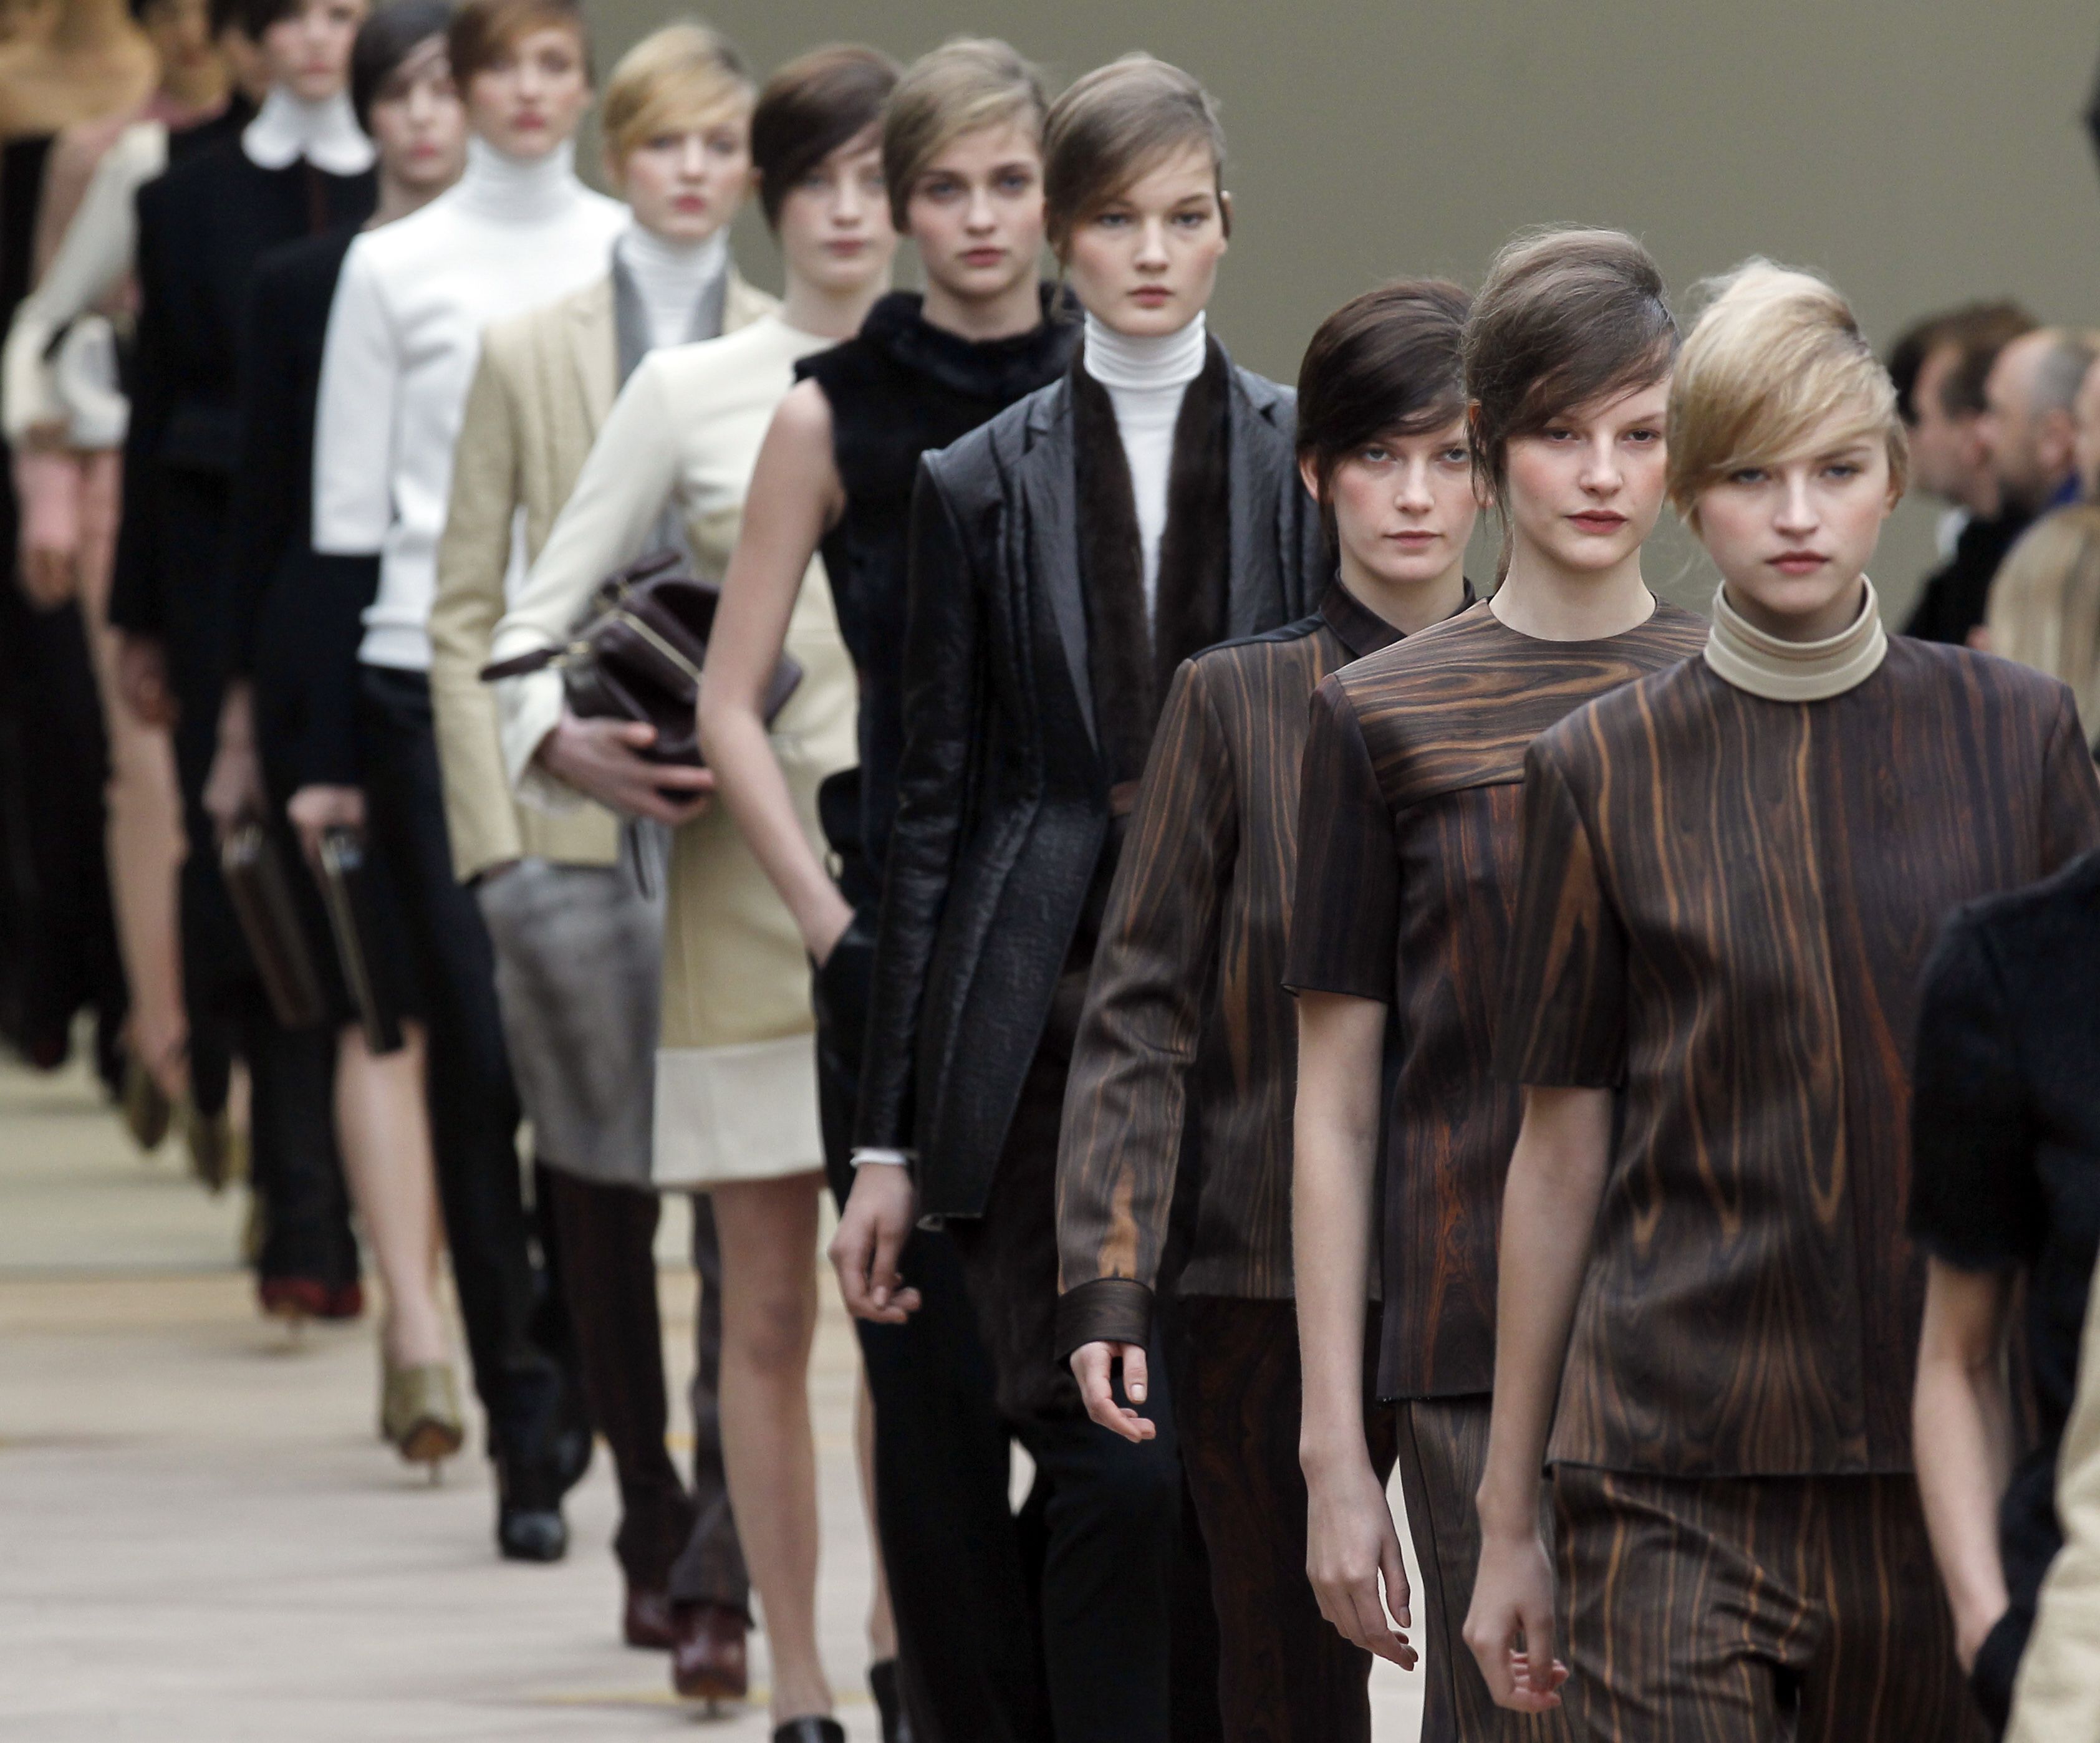 Phoebe Philo unveils 'warm and immensely likeable' Céline